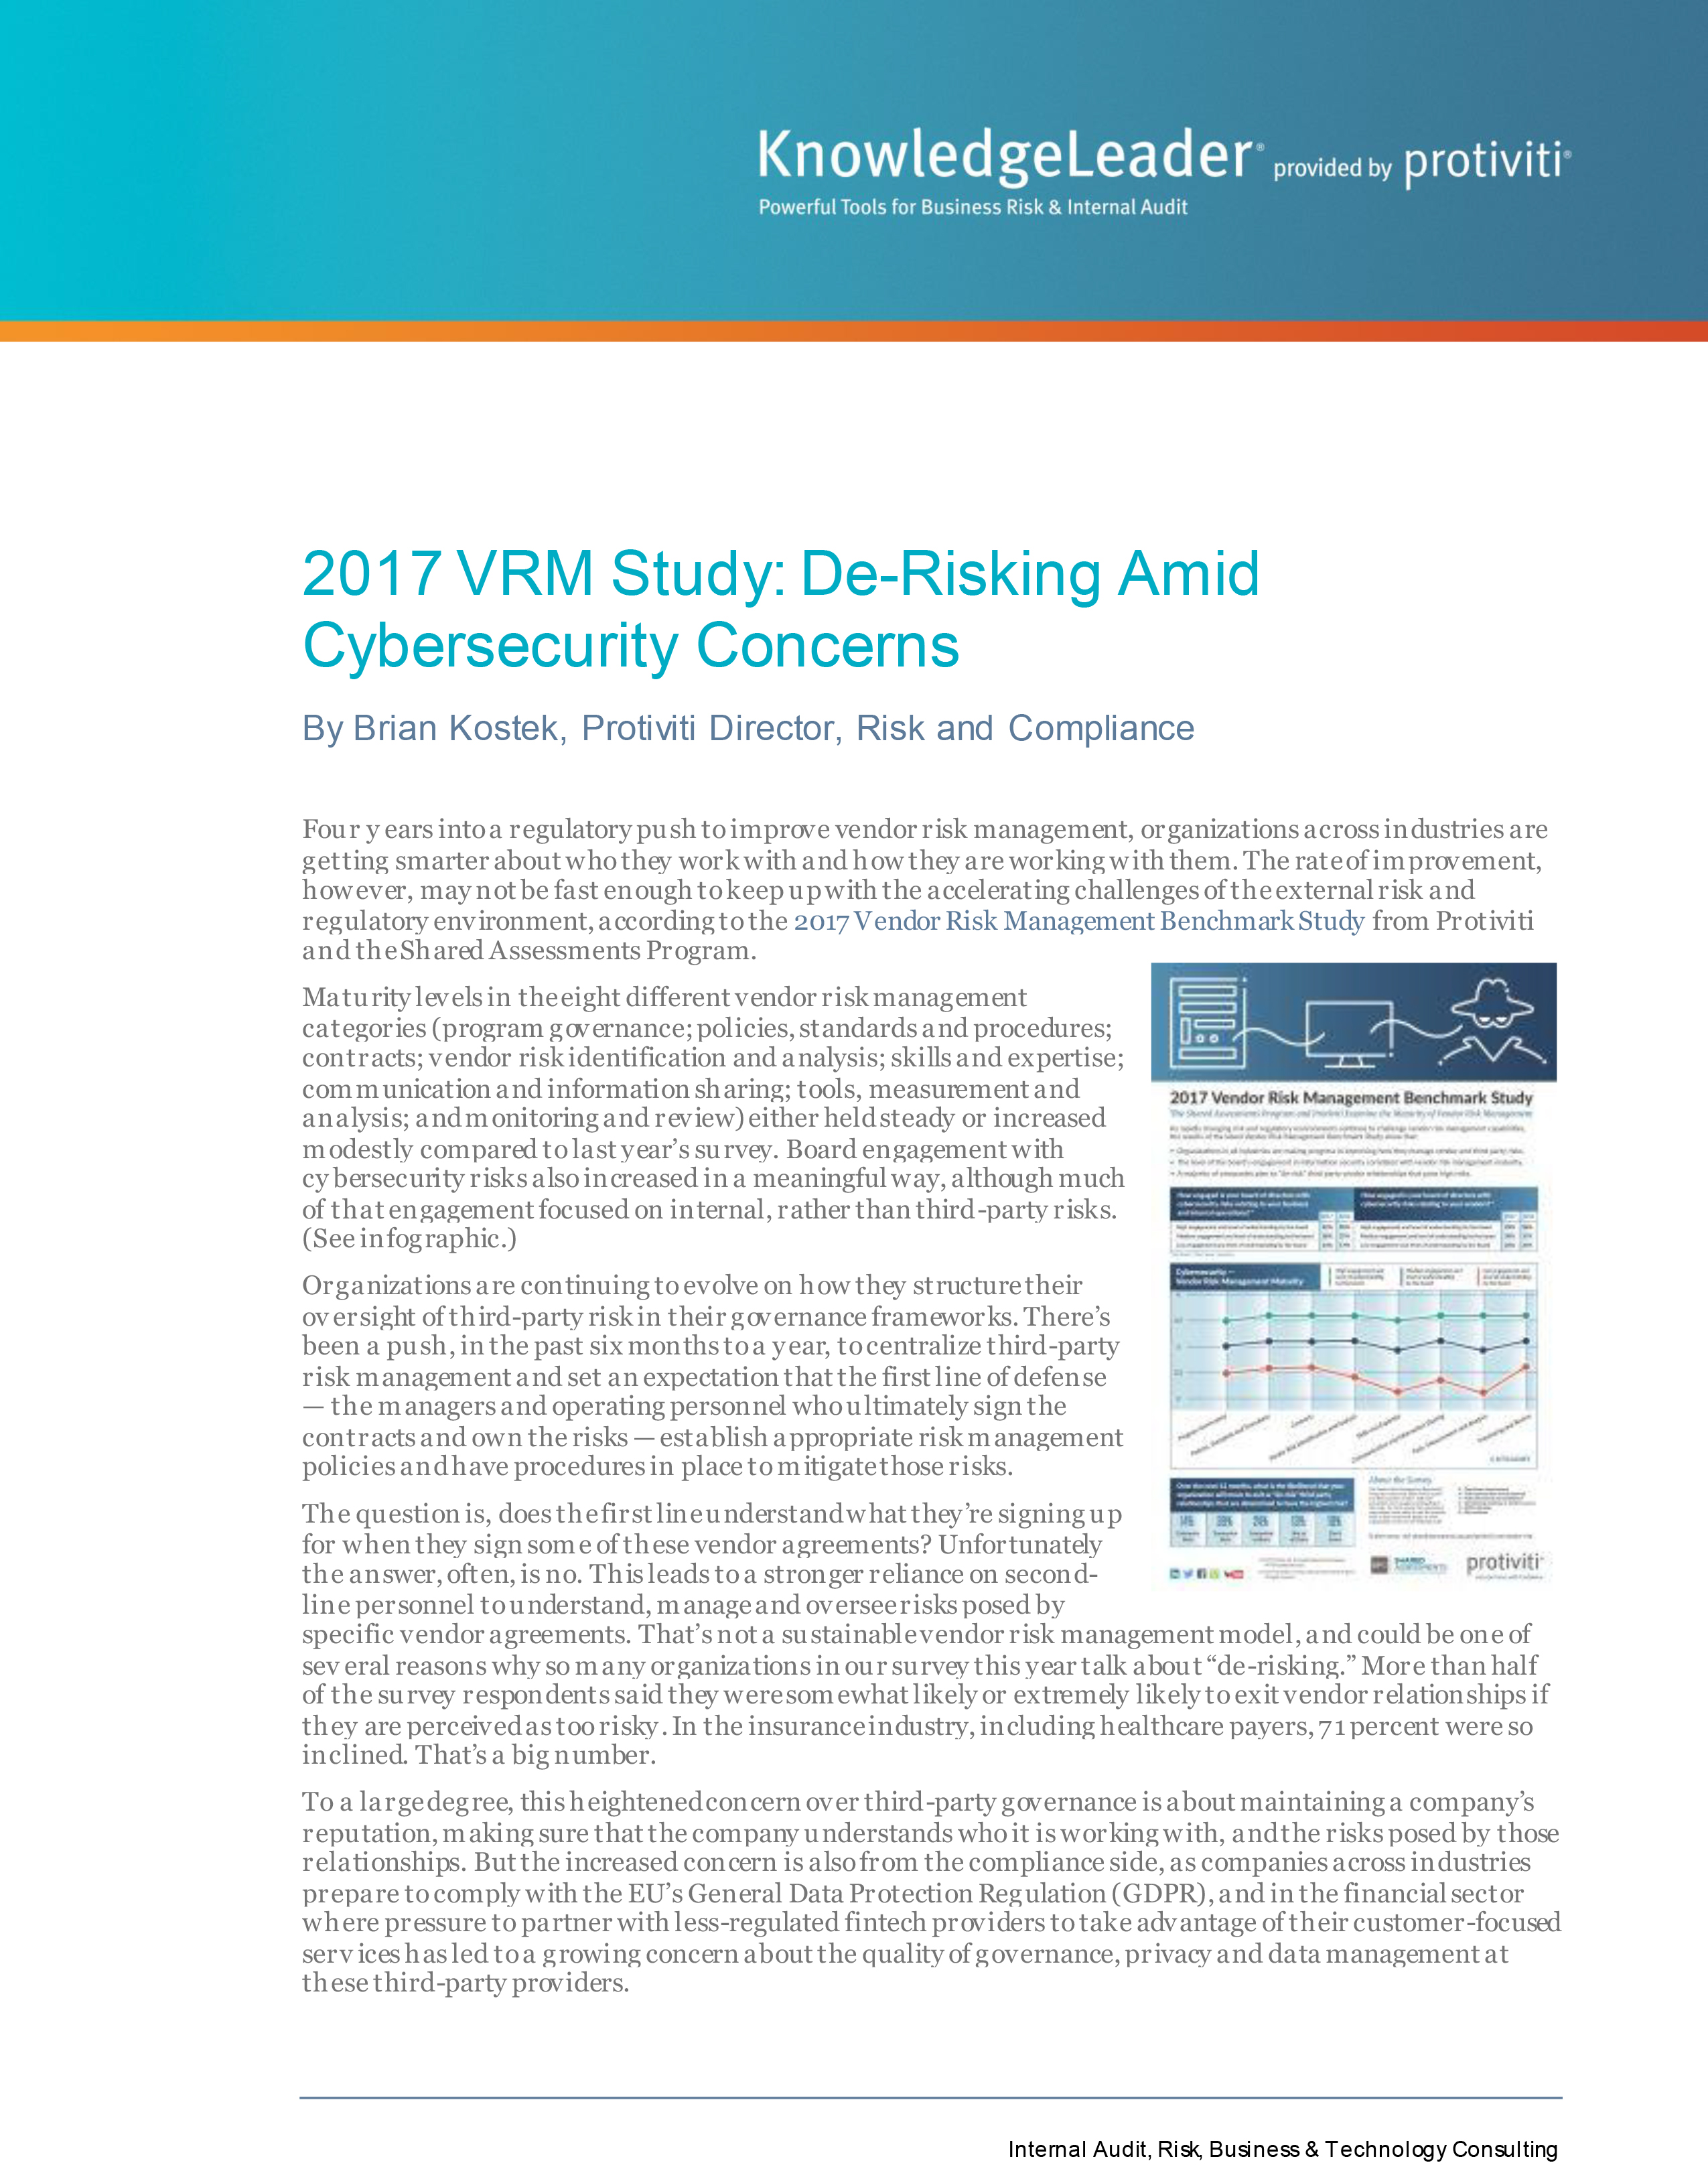 Screenshot of the first page of 2017 VRM Study: De-Risking Amid Cybersecurity Concerns